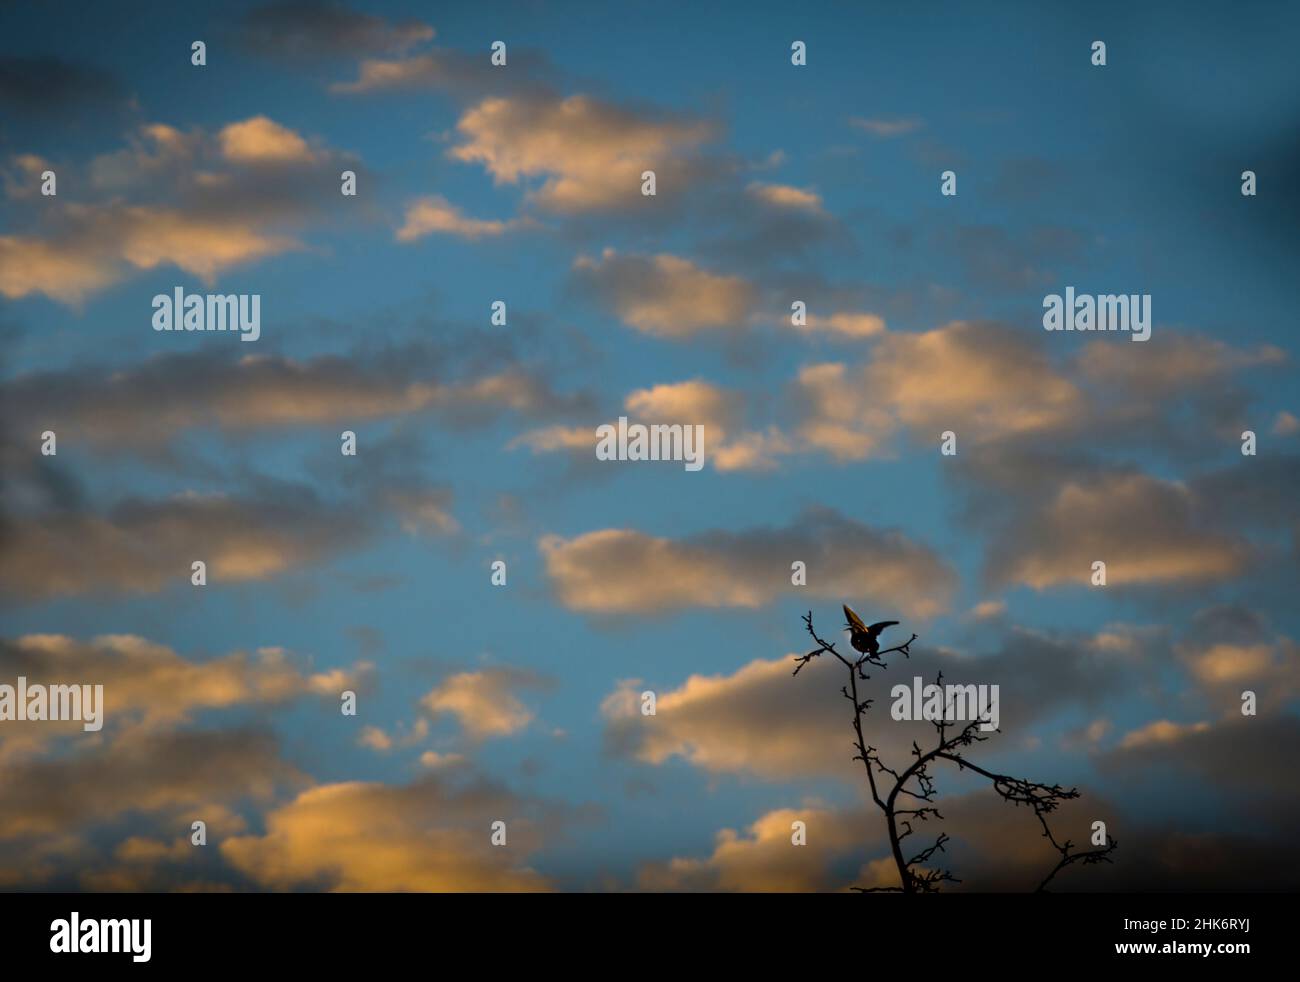 A starling, singing on the treetop, with a view of sunset clouds Stock Photo